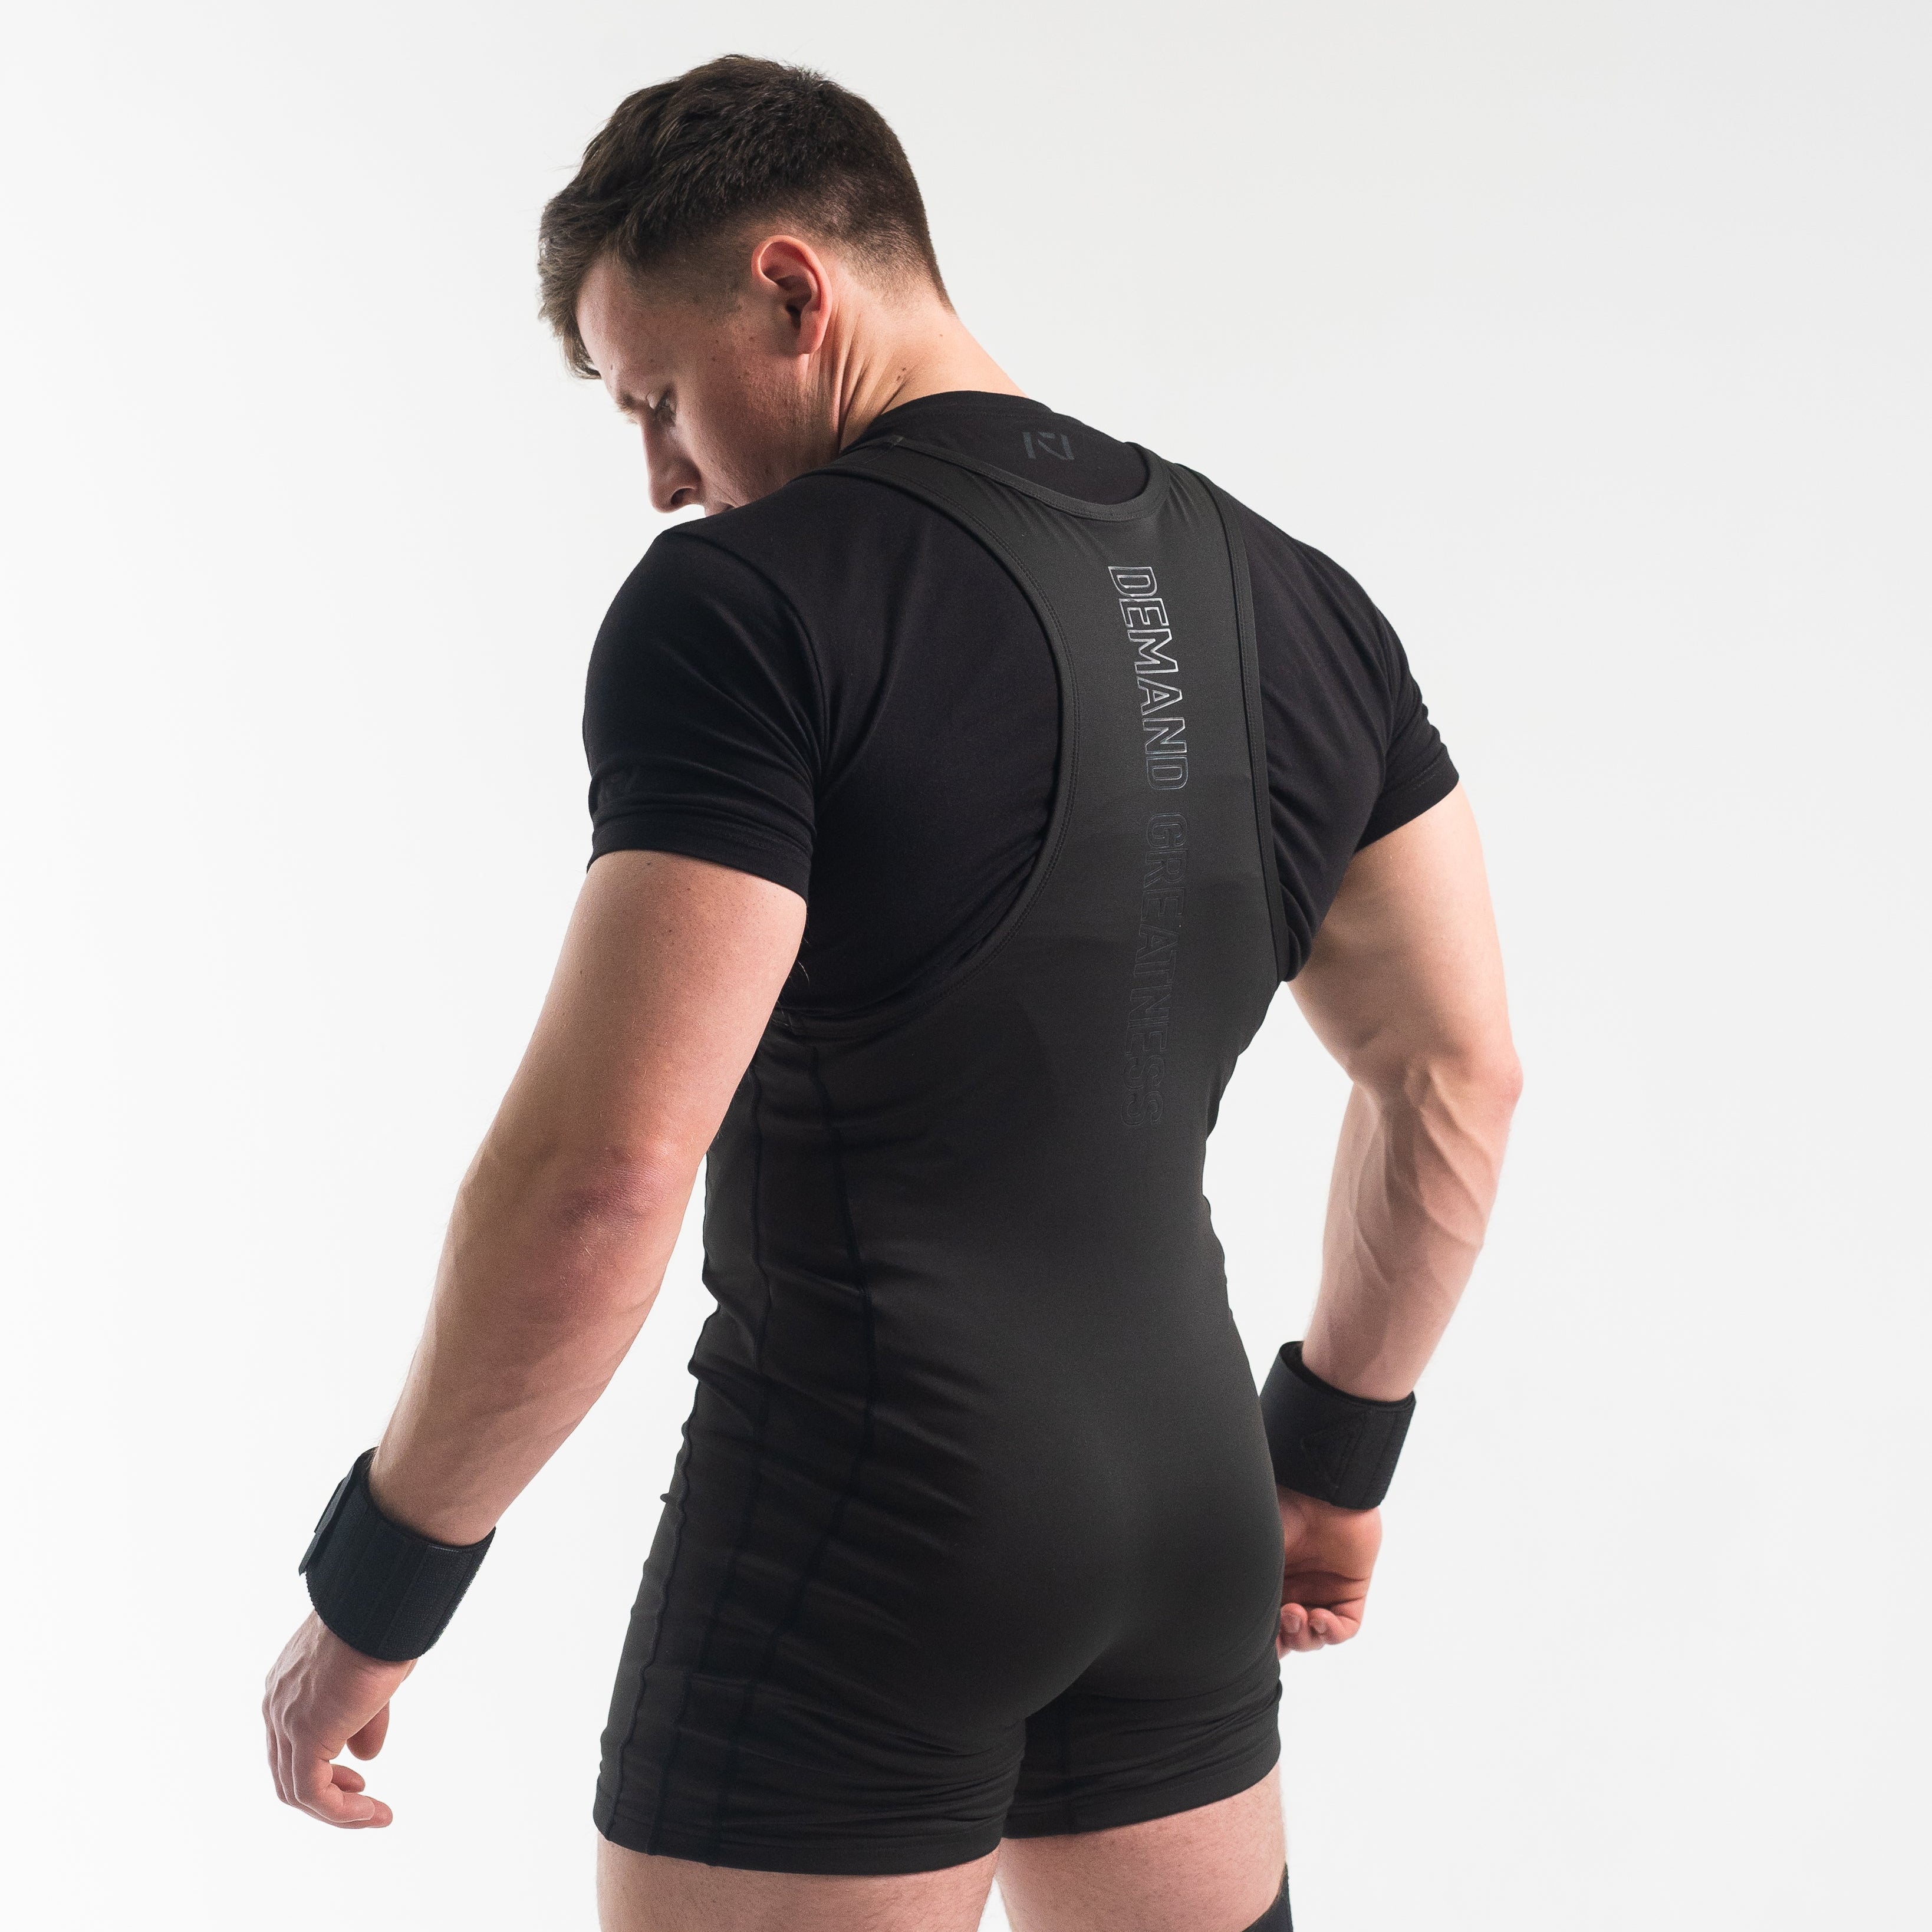 A7 IPF Approved Stealth Luno singlet features extra lat mobility, side panel stitching to guide the squat depth level and curved panel design for a slimming look. The Women's cut singlet features a tapered waist and additional quad room. The IPF Approved Kit includes Luno Powerlifting Singlet, A7 Meet Shirt, A7 Zebra Wrist Wraps, A7 Deadlift Socks, Hourglass Knee Sleeves (Stiff Knee Sleeves and Rigor Mortis Knee Sleeves). All A7 Powerlifting Equipment shipping to UK, Norway, Switzerland and Iceland.